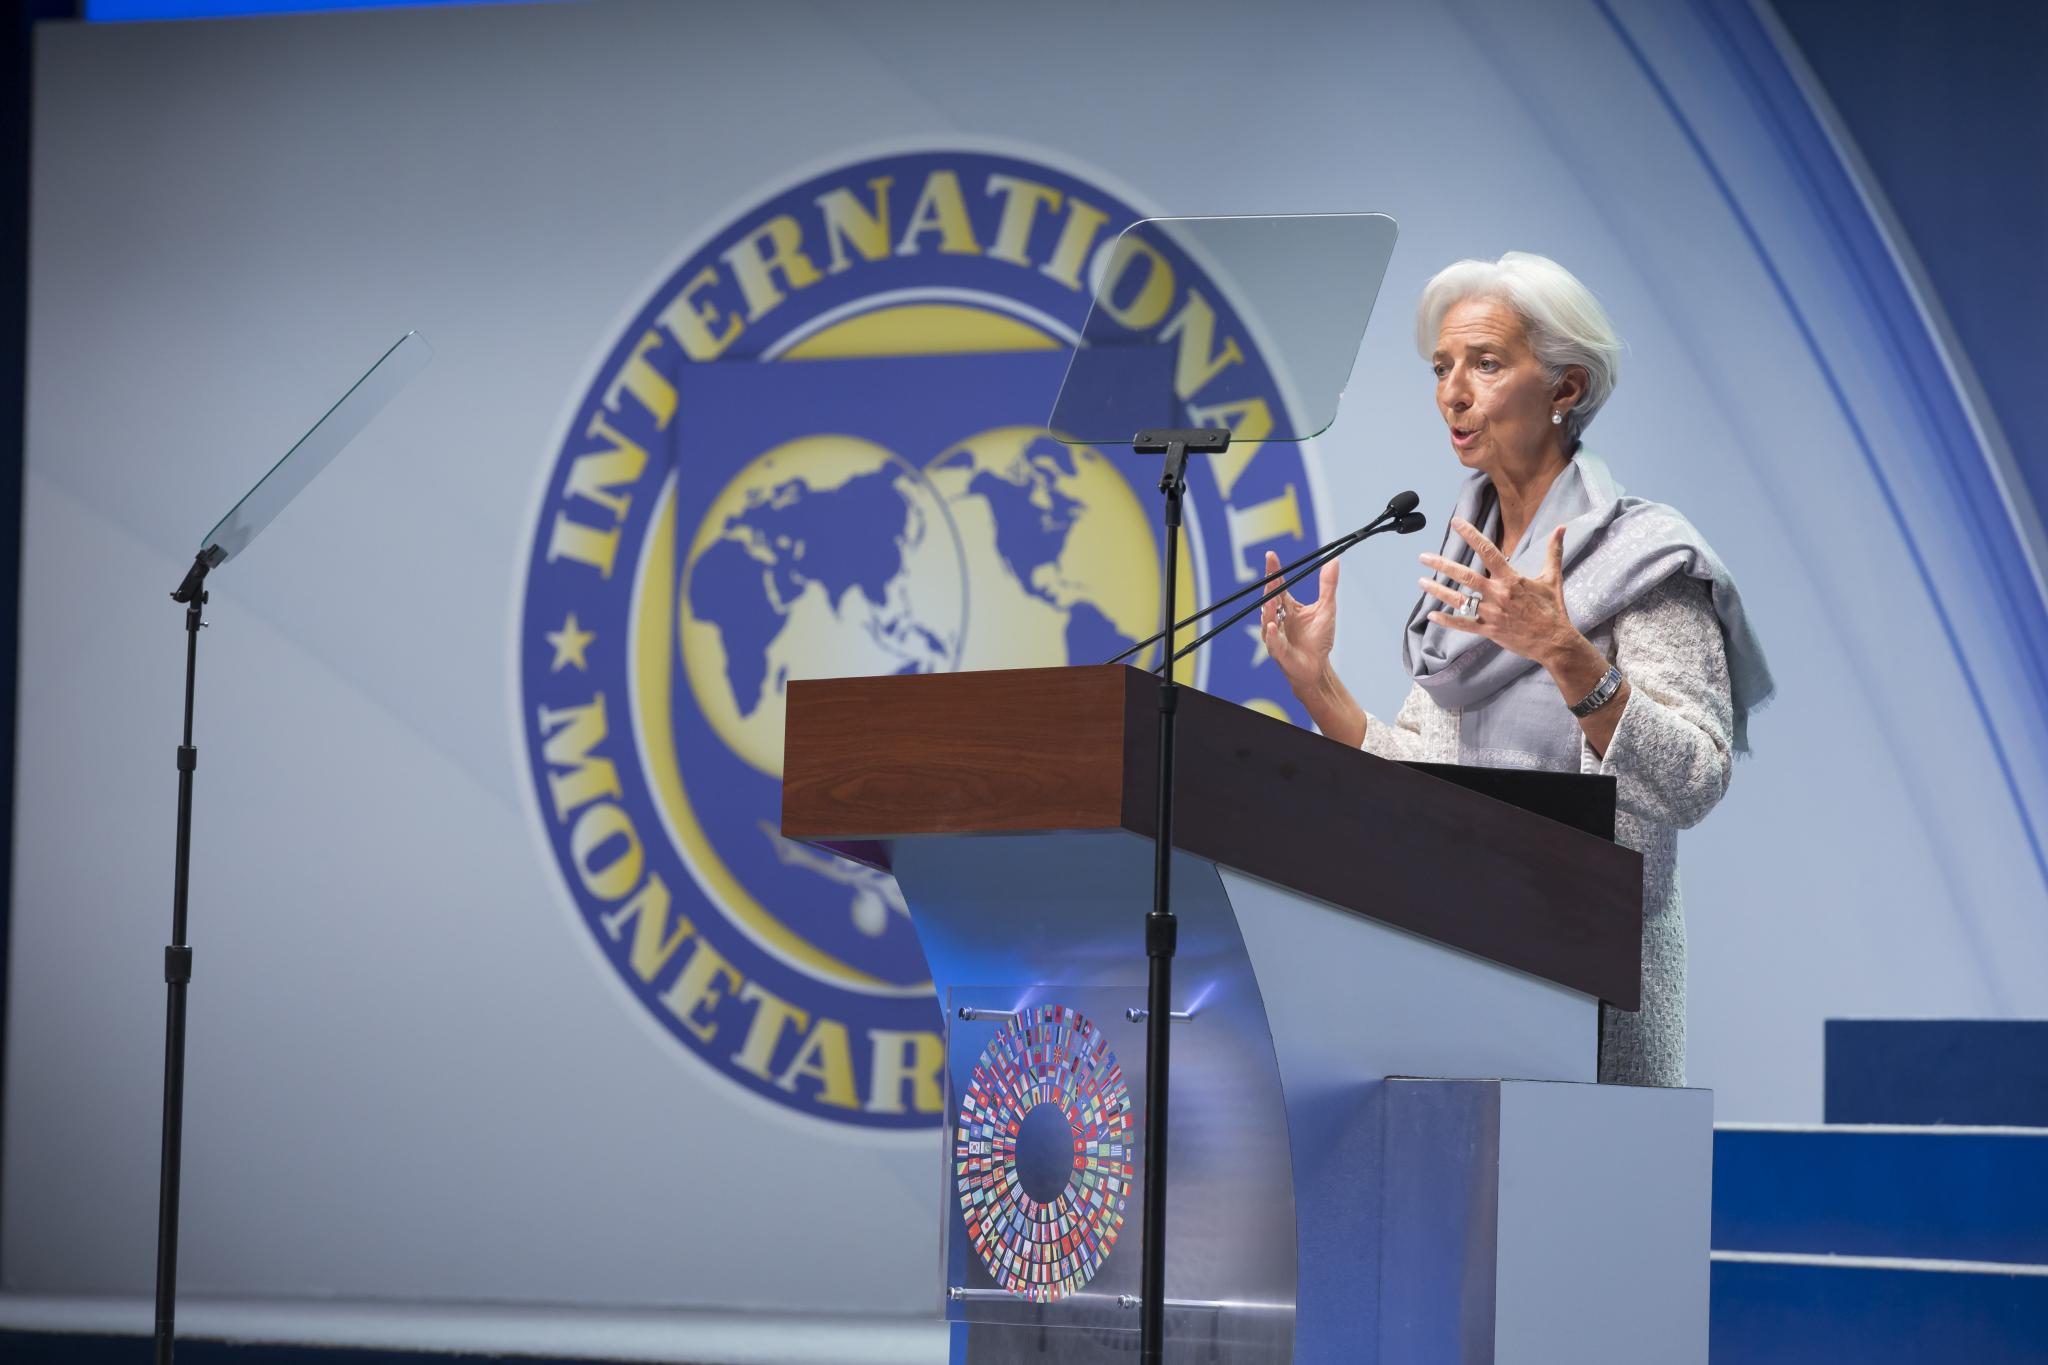 Madame Christine Lagarde, Managing Director and Chairman of the Executive Board, IMF